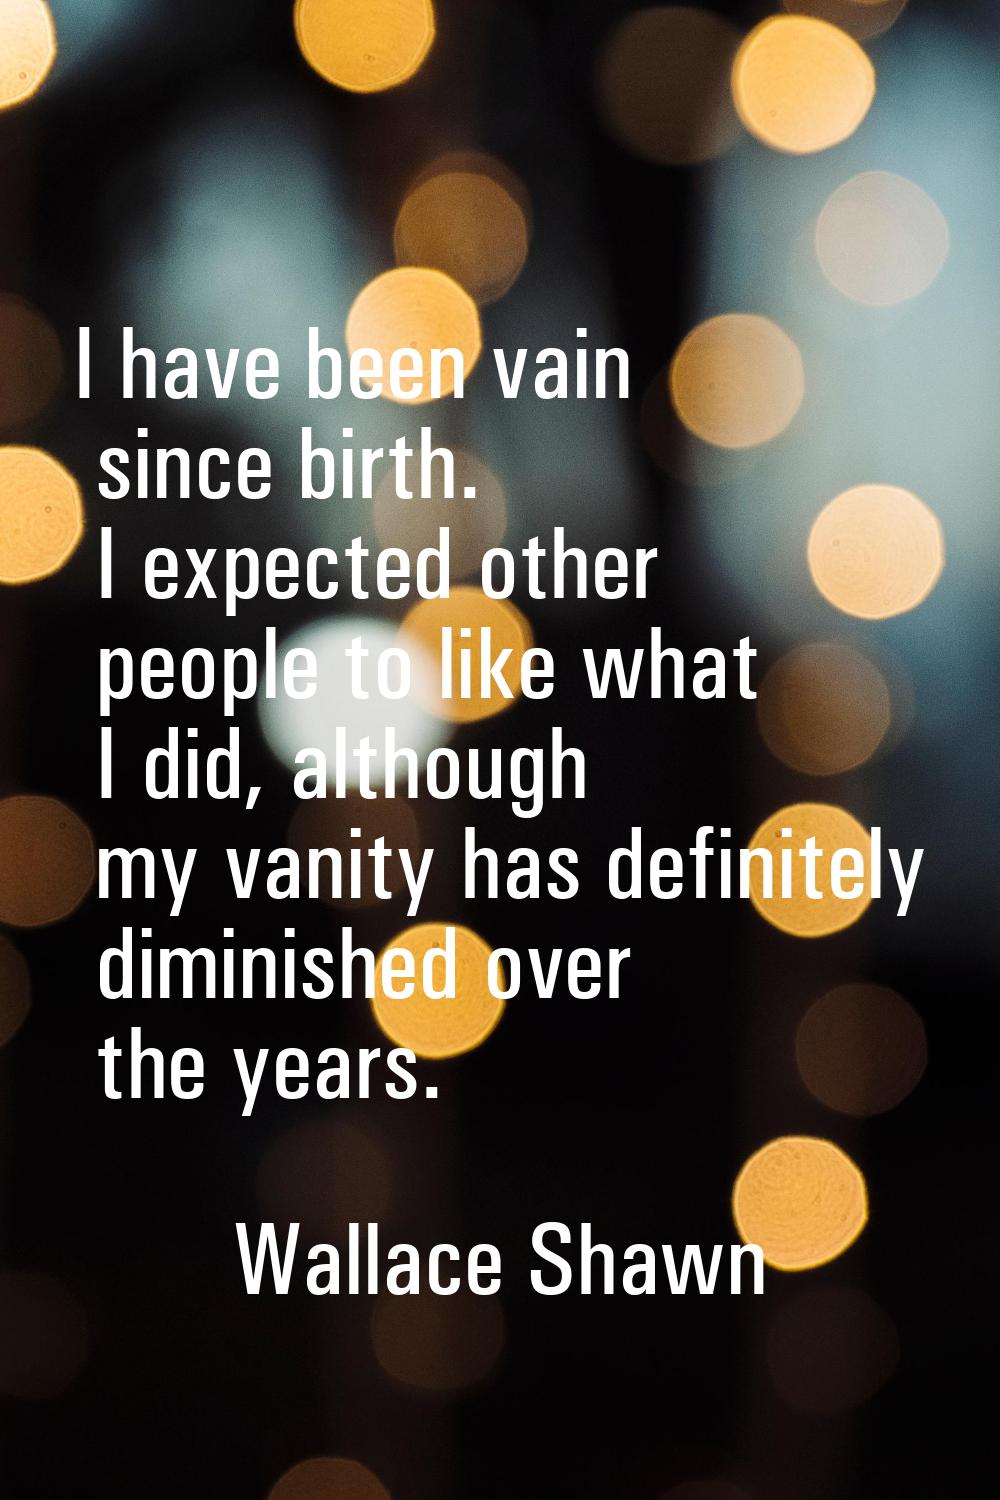 I have been vain since birth. I expected other people to like what I did, although my vanity has de